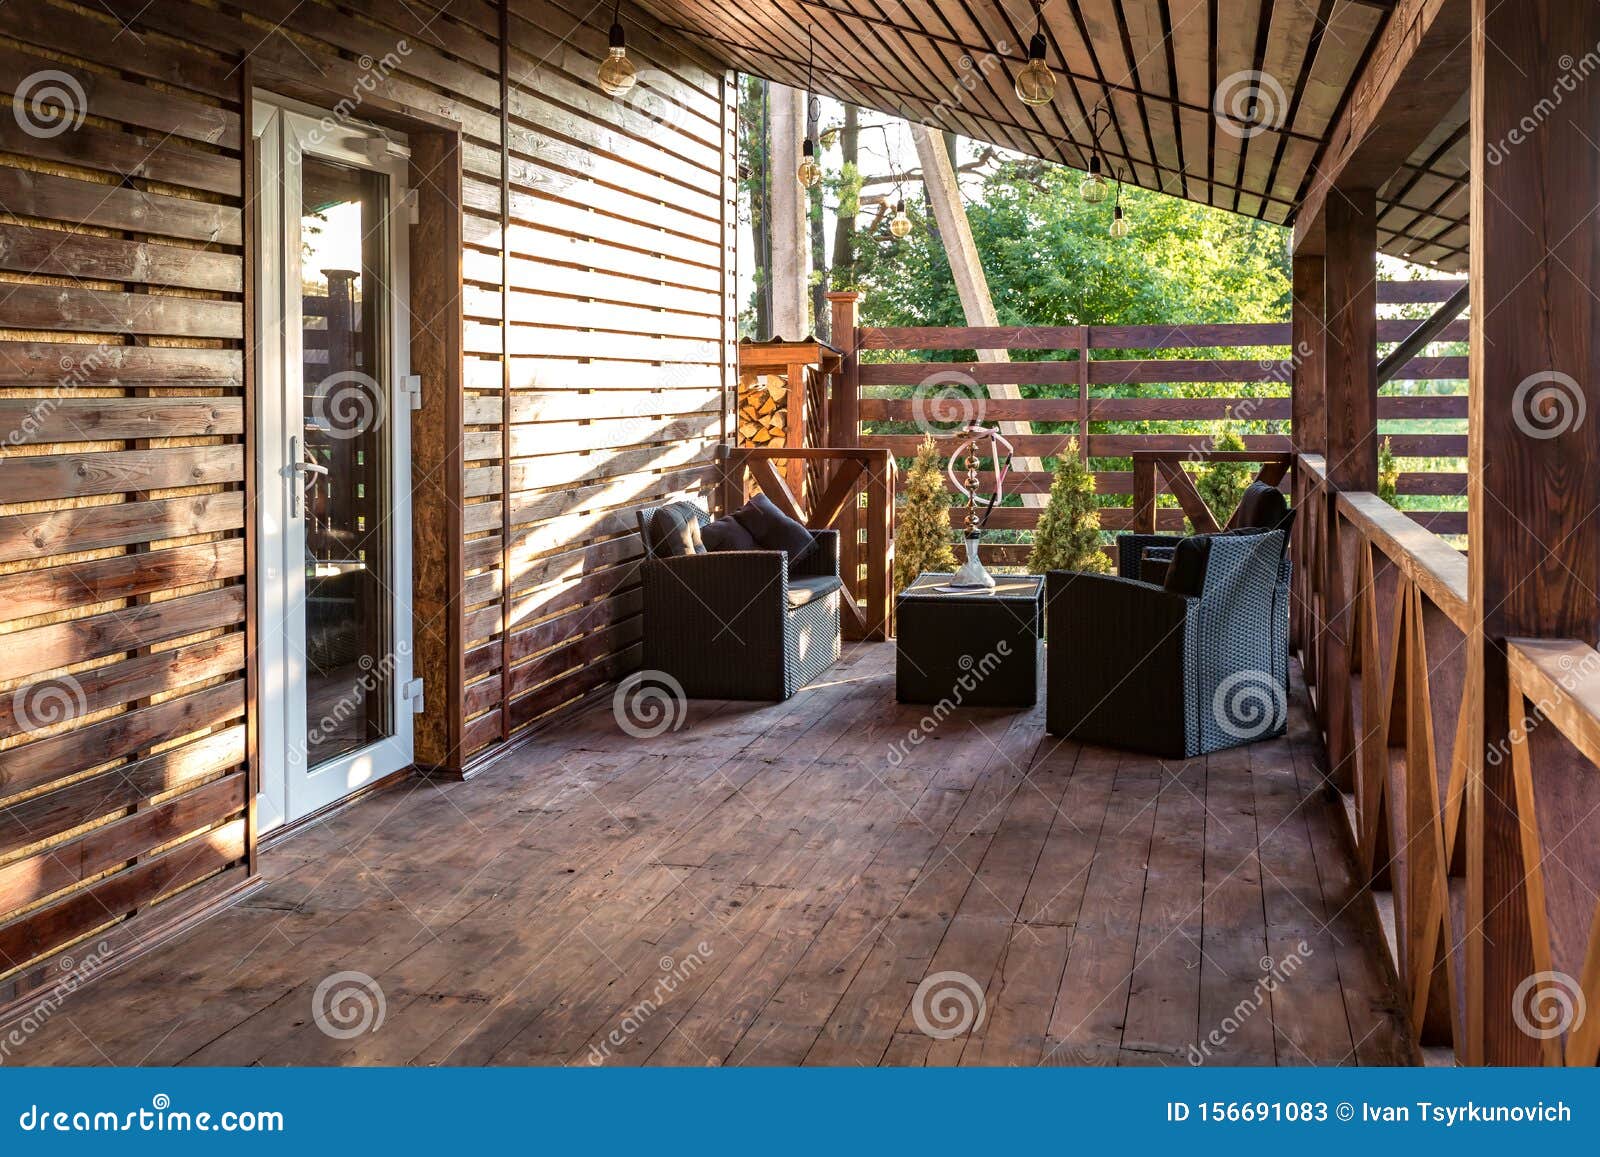 interior of empty hall veranda in wooden village vacation home with vintage lamps and chairs